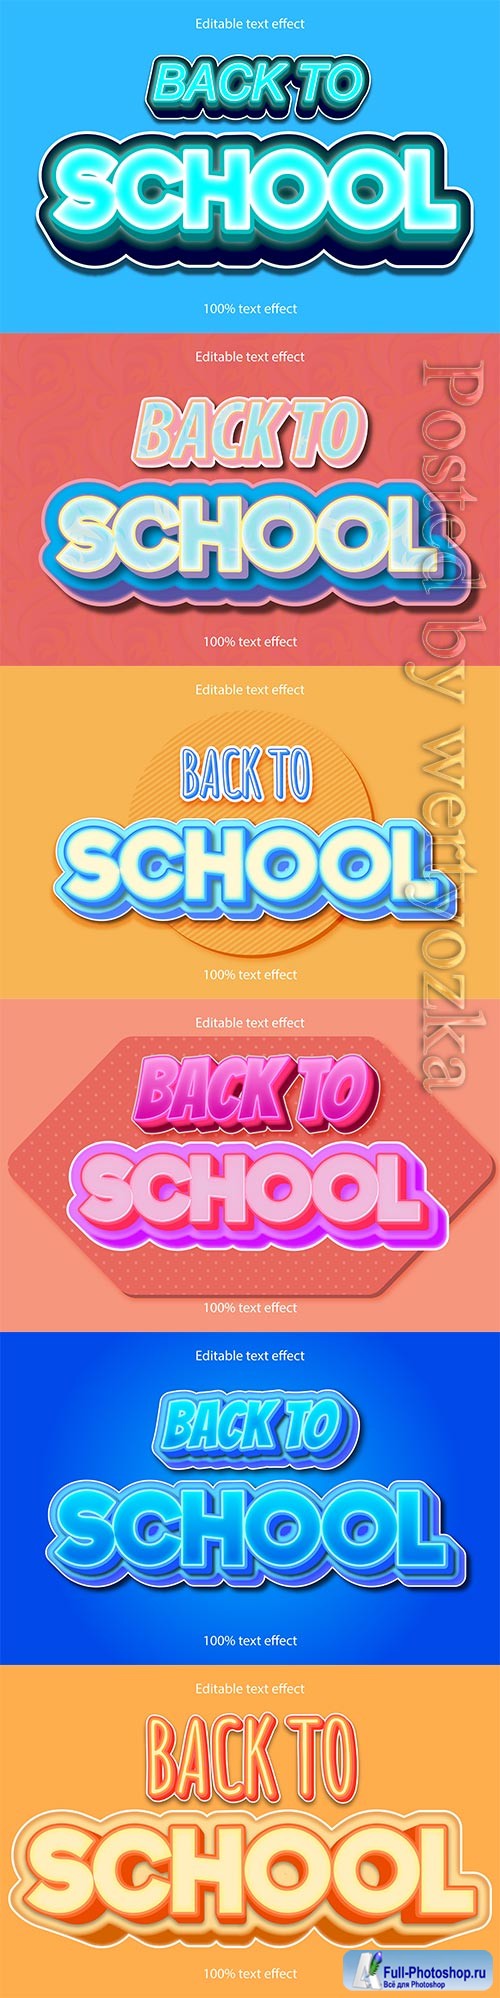 Back to school editable text effect vol 4